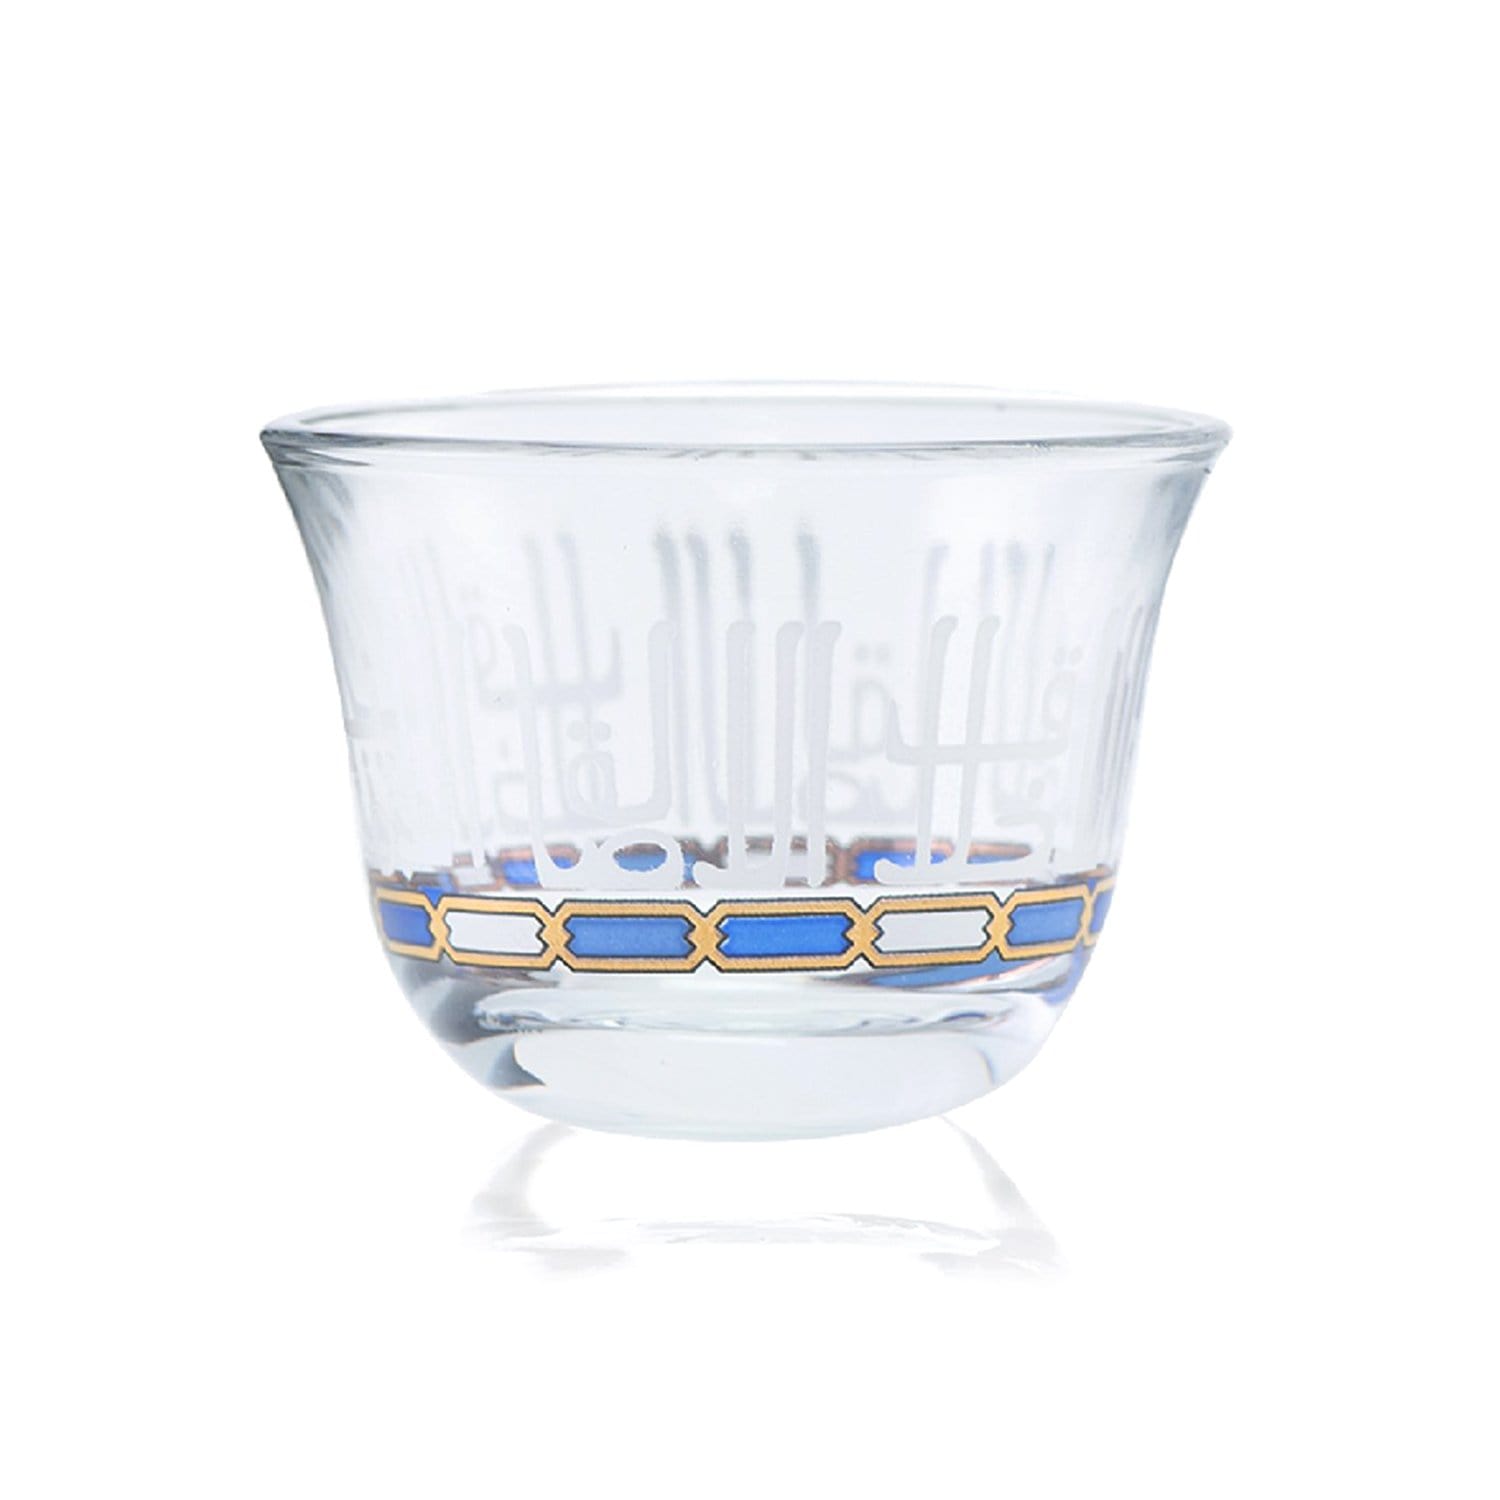 Dimlaj Asala Cawa Cup Set - Clear, Gold and Blue, 6 Pieces - 46677 - Jashanmal Home